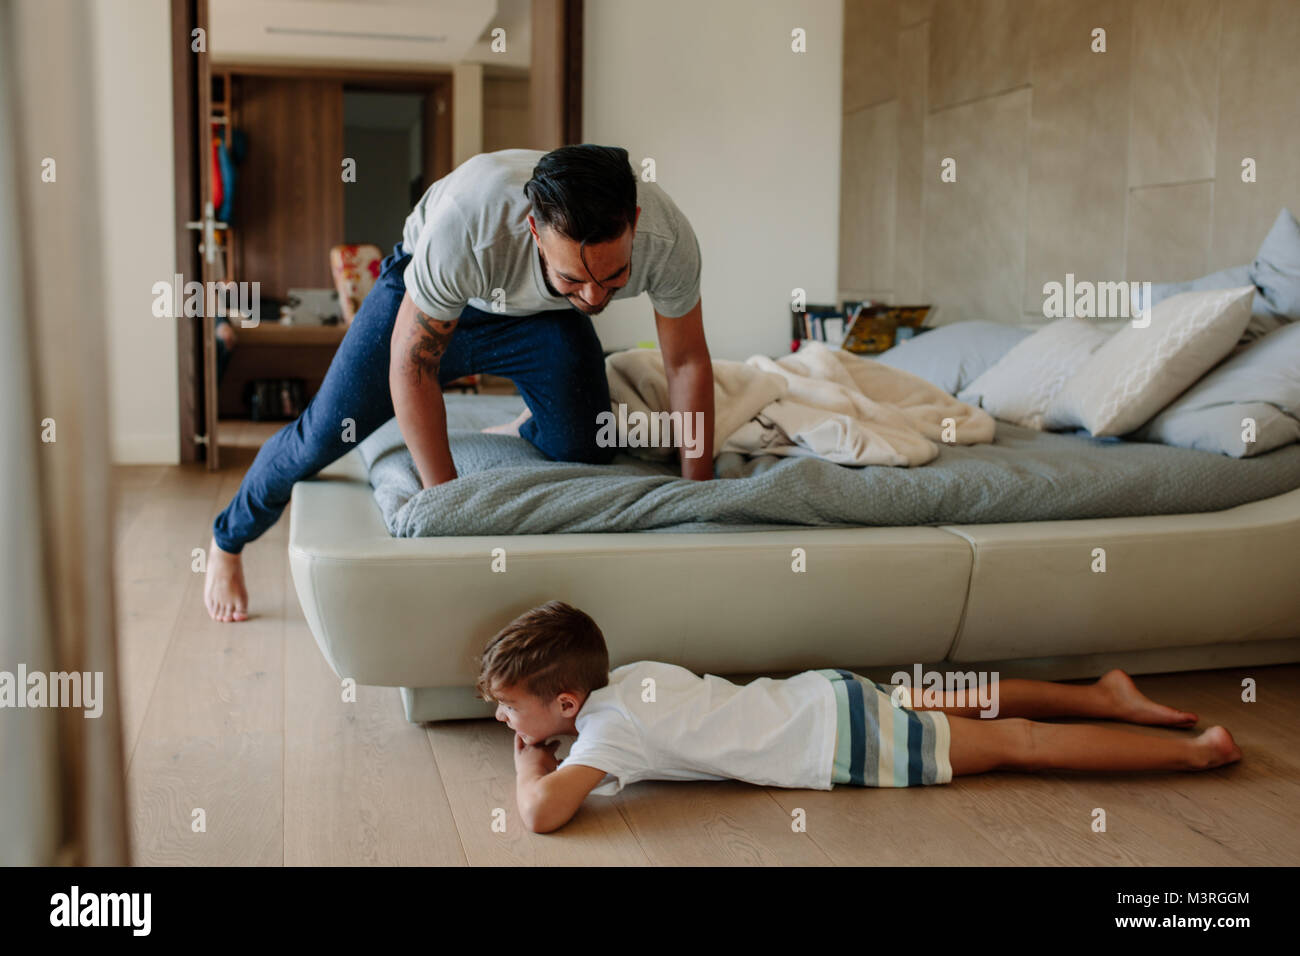 Father and son playing hide and seek in bedroom. Little boy hiding by the bed with father searching him. Family playing games inside their home. Stock Photo